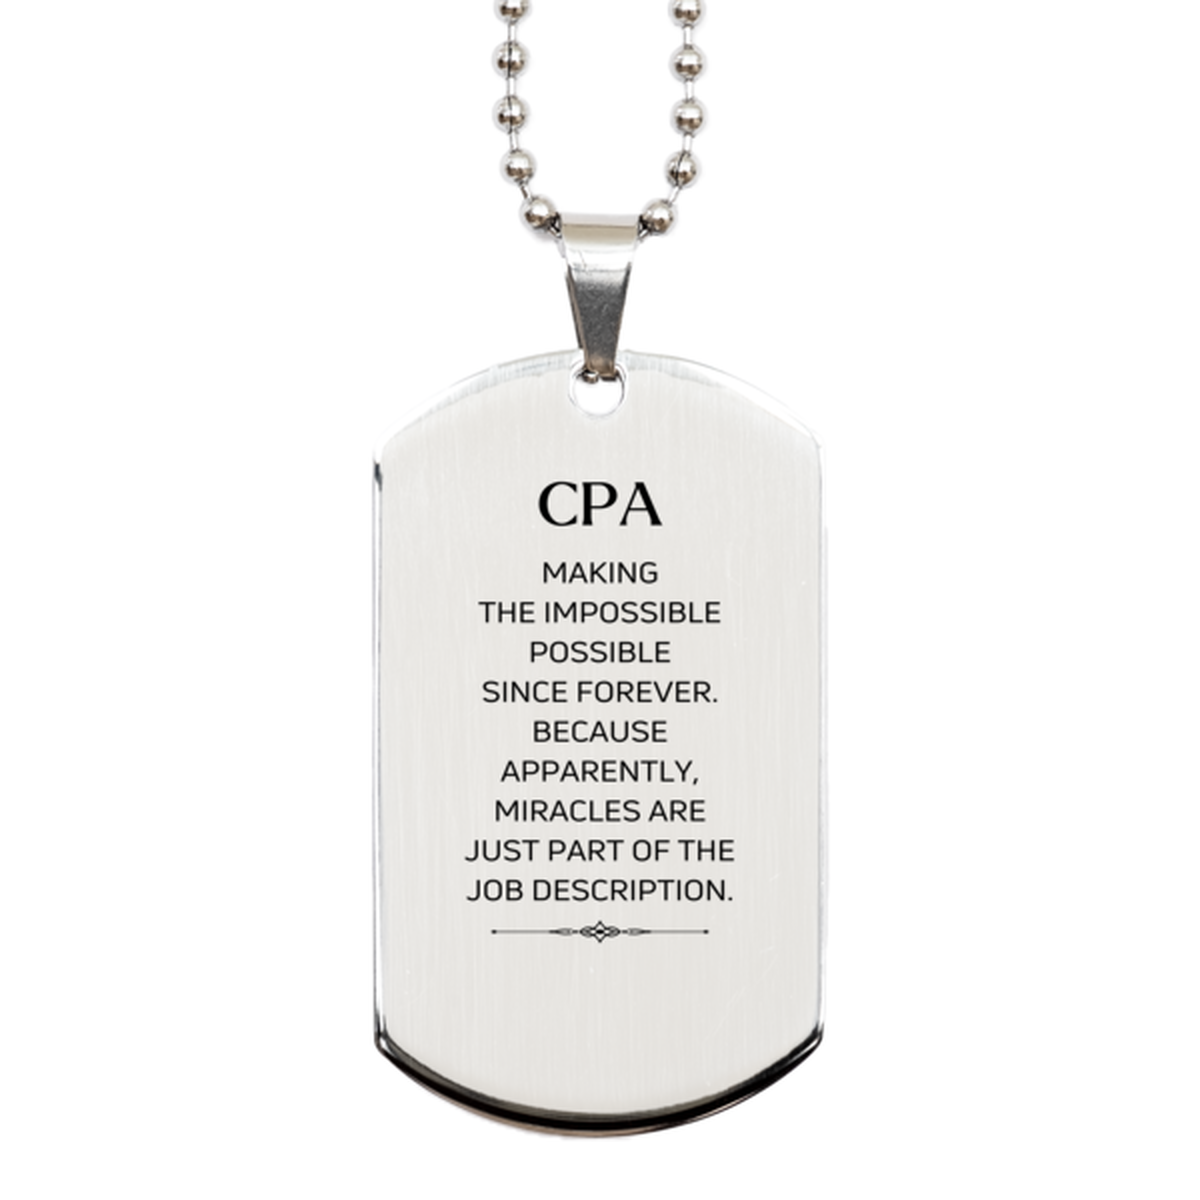 Funny CPA Gifts, Miracles are just part of the job description, Inspirational Birthday Silver Dog Tag For CPA, Men, Women, Coworkers, Friends, Boss